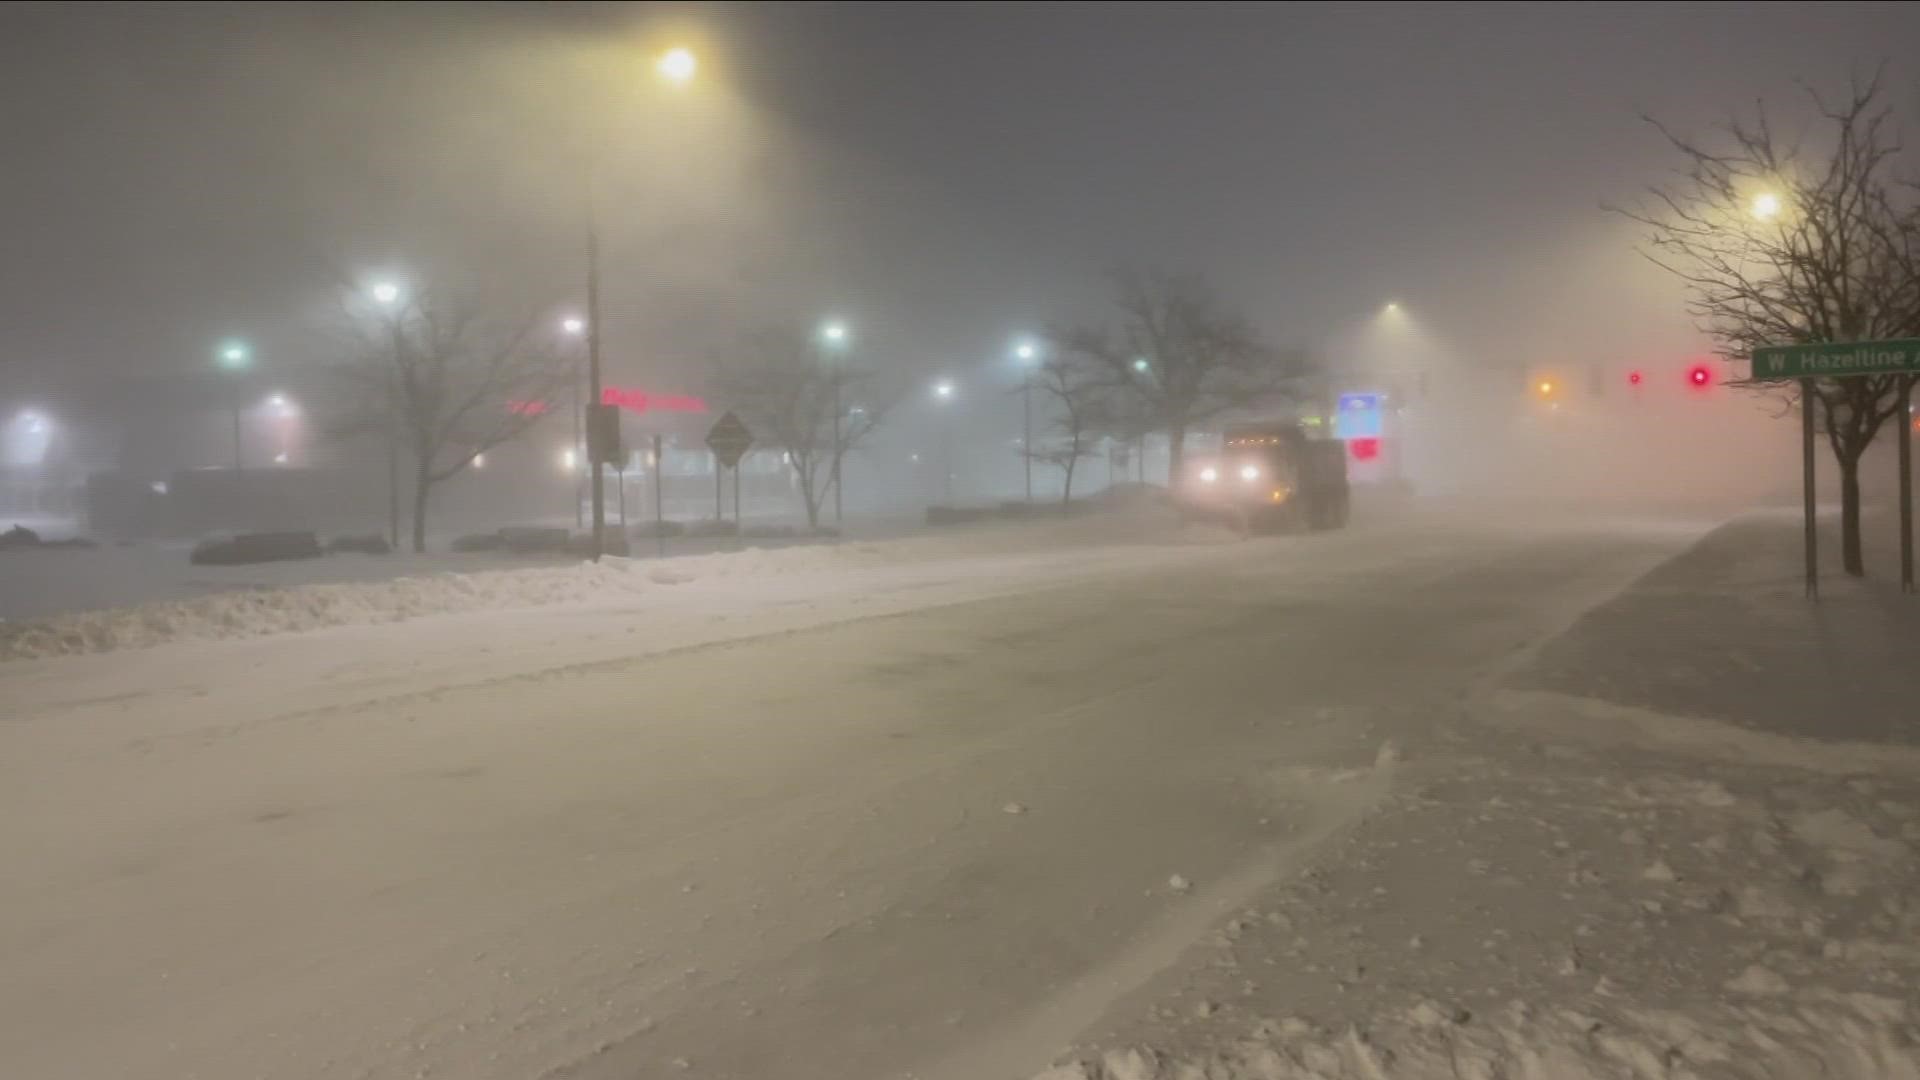 The blizzard in Western New York has impacted emergency services in the most affected areas.